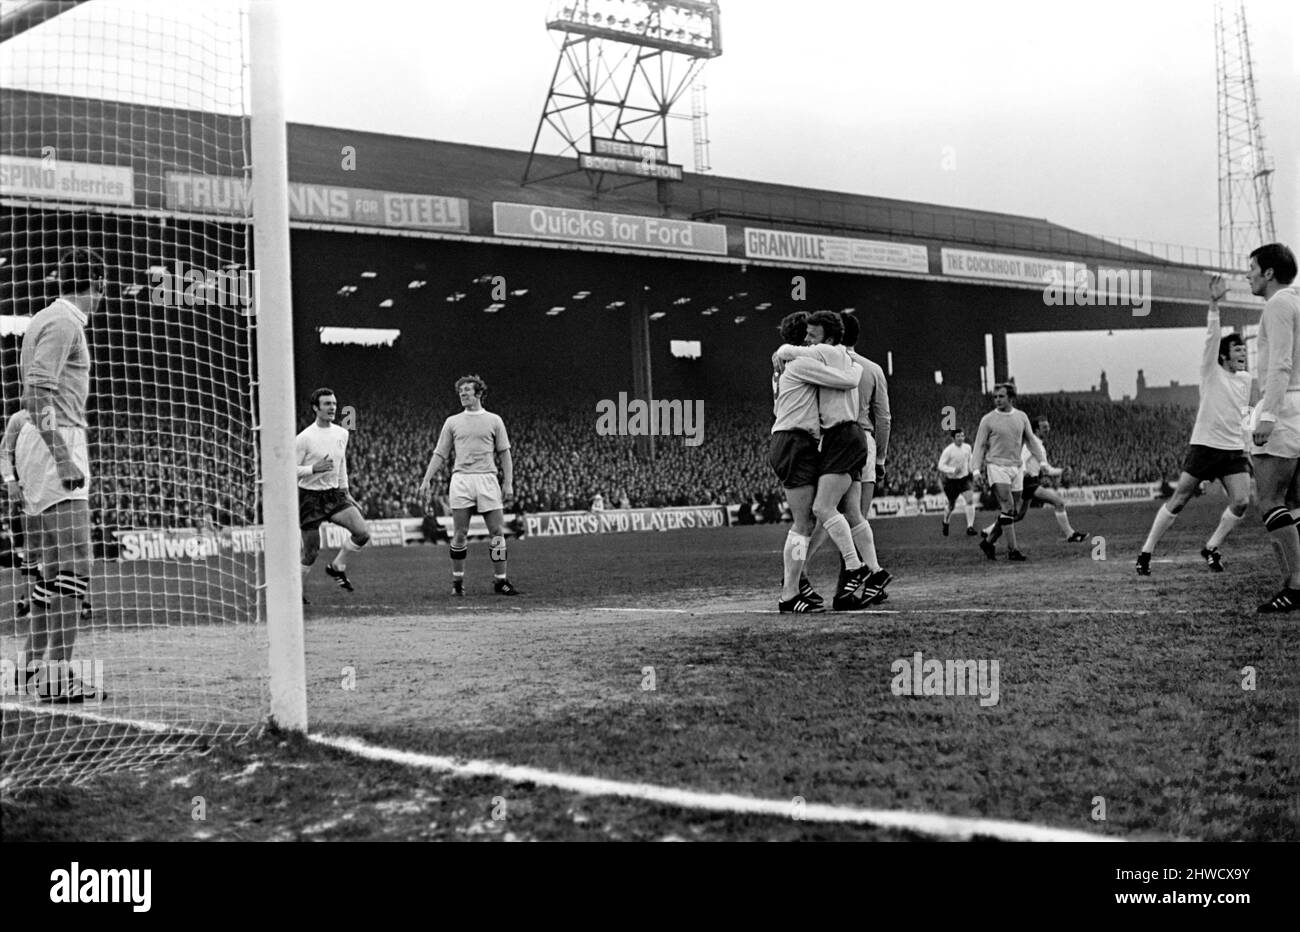 Derby v. Nottingham Forest. Action from the match. December 1969 Z11534-028 Stock Photo